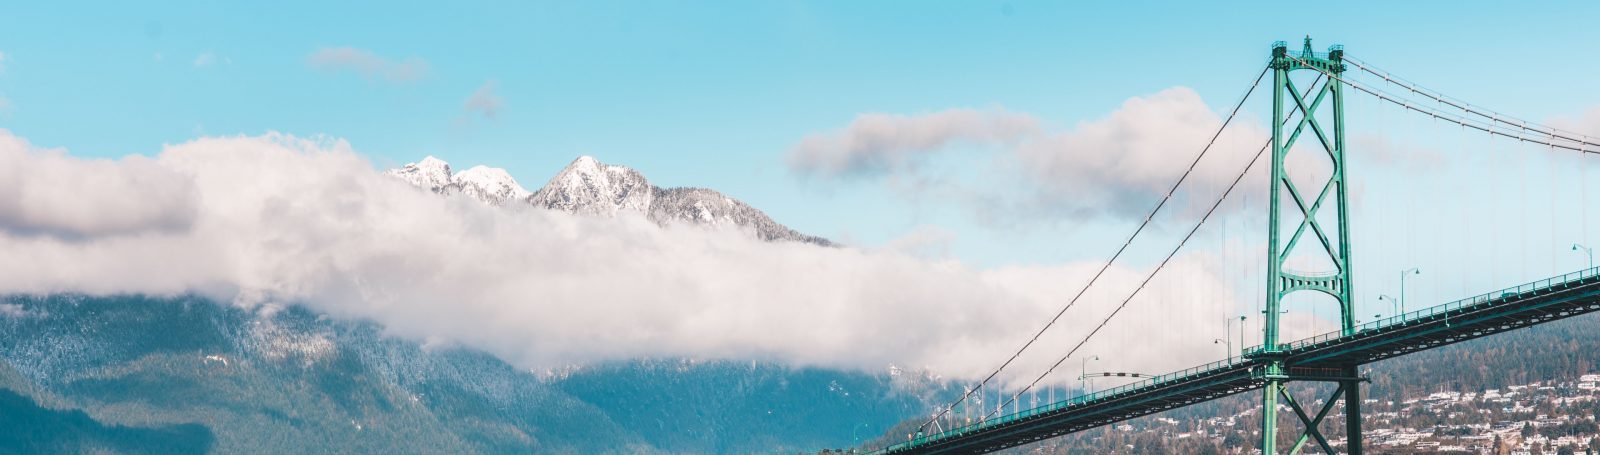 Low angle of First Narrows Bridge overlooking the Mountains of Vancouver B.C.